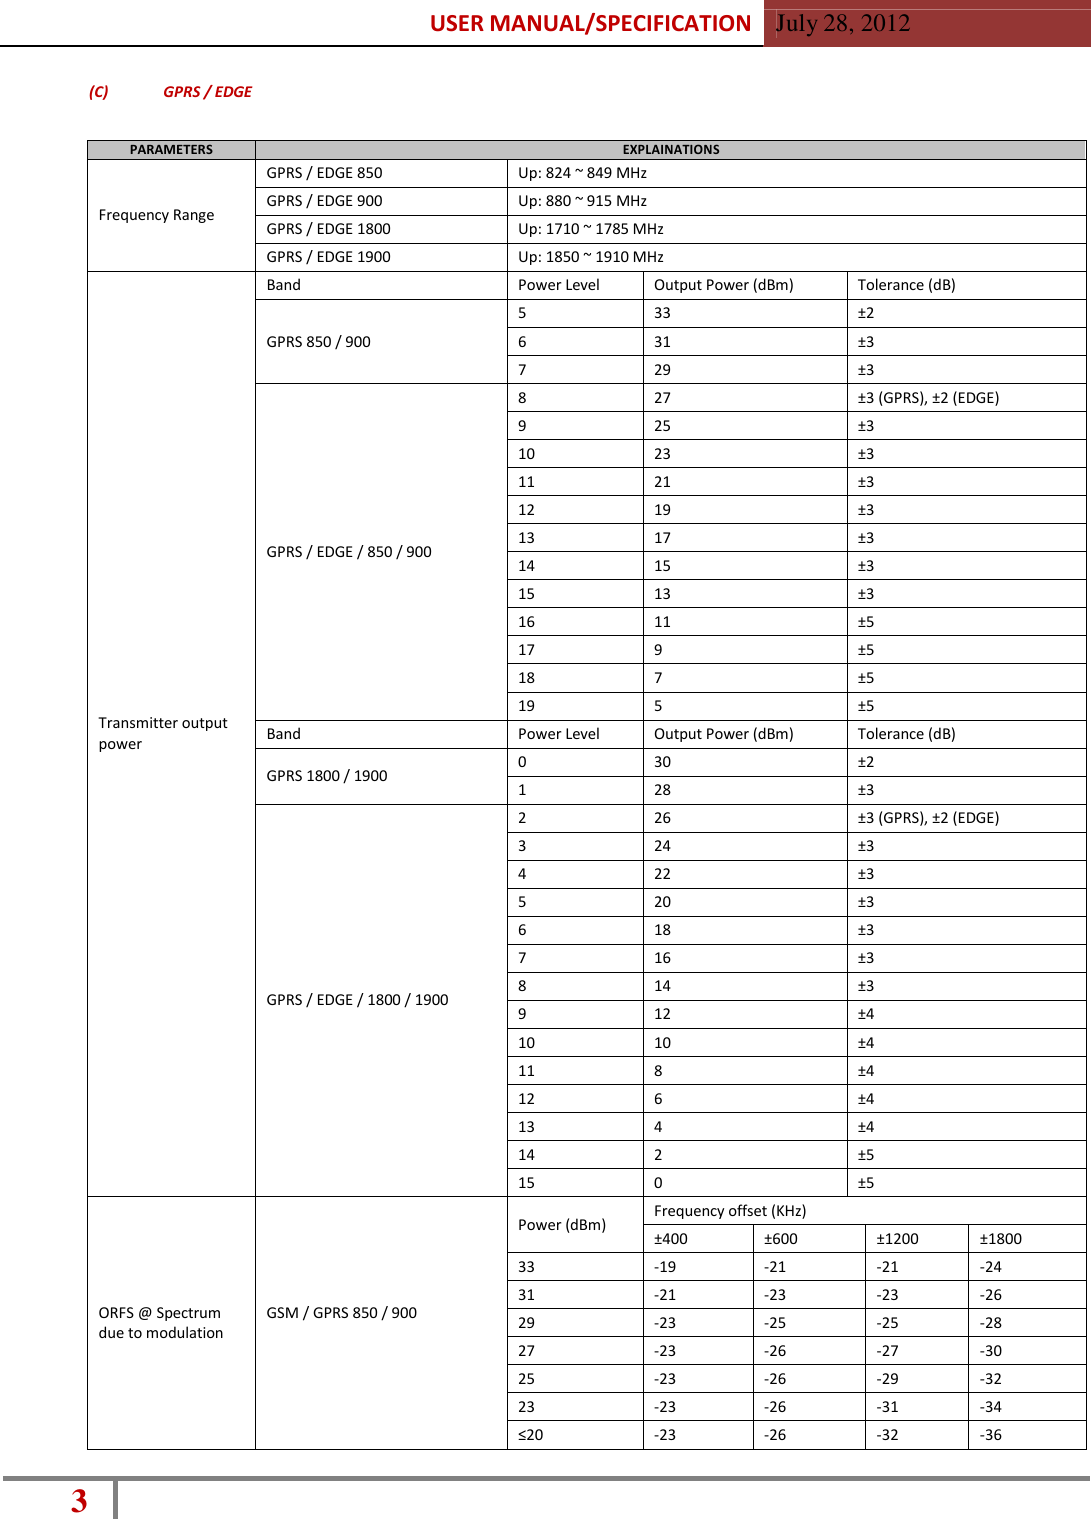 USER MANUAL/SPECIFICATION  July 28, 2012 3    (C)  GPRS / EDGE   PARAMETERS EXPLAINATIONS   Frequency Range GPRS / EDGE 850 Up: 824 ~ 849 MHz GPRS / EDGE 900 Up: 880 ~ 915 MHz GPRS / EDGE 1800 Up: 1710 ~ 1785 MHz GPRS / EDGE 1900 Up: 1850 ~ 1910 MHz                      Transmitter output power Band Power Level Output Power (dBm) Tolerance (dB)   GPRS 850 / 900 5 33 ±2 6 31 ±3 7 29 ±3         GPRS / EDGE / 850 / 900 8 27 ±3 (GPRS), ±2 (EDGE) 9 25 ±3 10 23 ±3 11 21 ±3 12 19 ±3 13 17 ±3 14 15 ±3 15 13 ±3 16 11 ±5 17 9 ±5 18 7 ±5 19 5 ±5 Band Power Level Output Power (dBm) Tolerance (dB)  GPRS 1800 / 1900 0 30 ±2 1 28 ±3          GPRS / EDGE / 1800 / 1900 2 26 ±3 (GPRS), ±2 (EDGE) 3 24 ±3 4 22 ±3 5 20 ±3 6 18 ±3 7 16 ±3 8 14 ±3 9 12 ±4 10 10 ±4 11 8 ±4 12 6 ±4 13 4 ±4 14 2 ±5 15 0 ±5      ORFS @ Spectrum due to modulation      GSM / GPRS 850 / 900  Power (dBm) Frequency offset (KHz) ±400 ±600 ±1200 ±1800 33 -19 -21 -21 -24 31 -21 -23 -23 -26 29 -23 -25 -25 -28 27 -23 -26 -27 -30 25 -23 -26 -29 -32 23 -23 -26 -31 -34 ≤20 -23 -26 -32 -36 